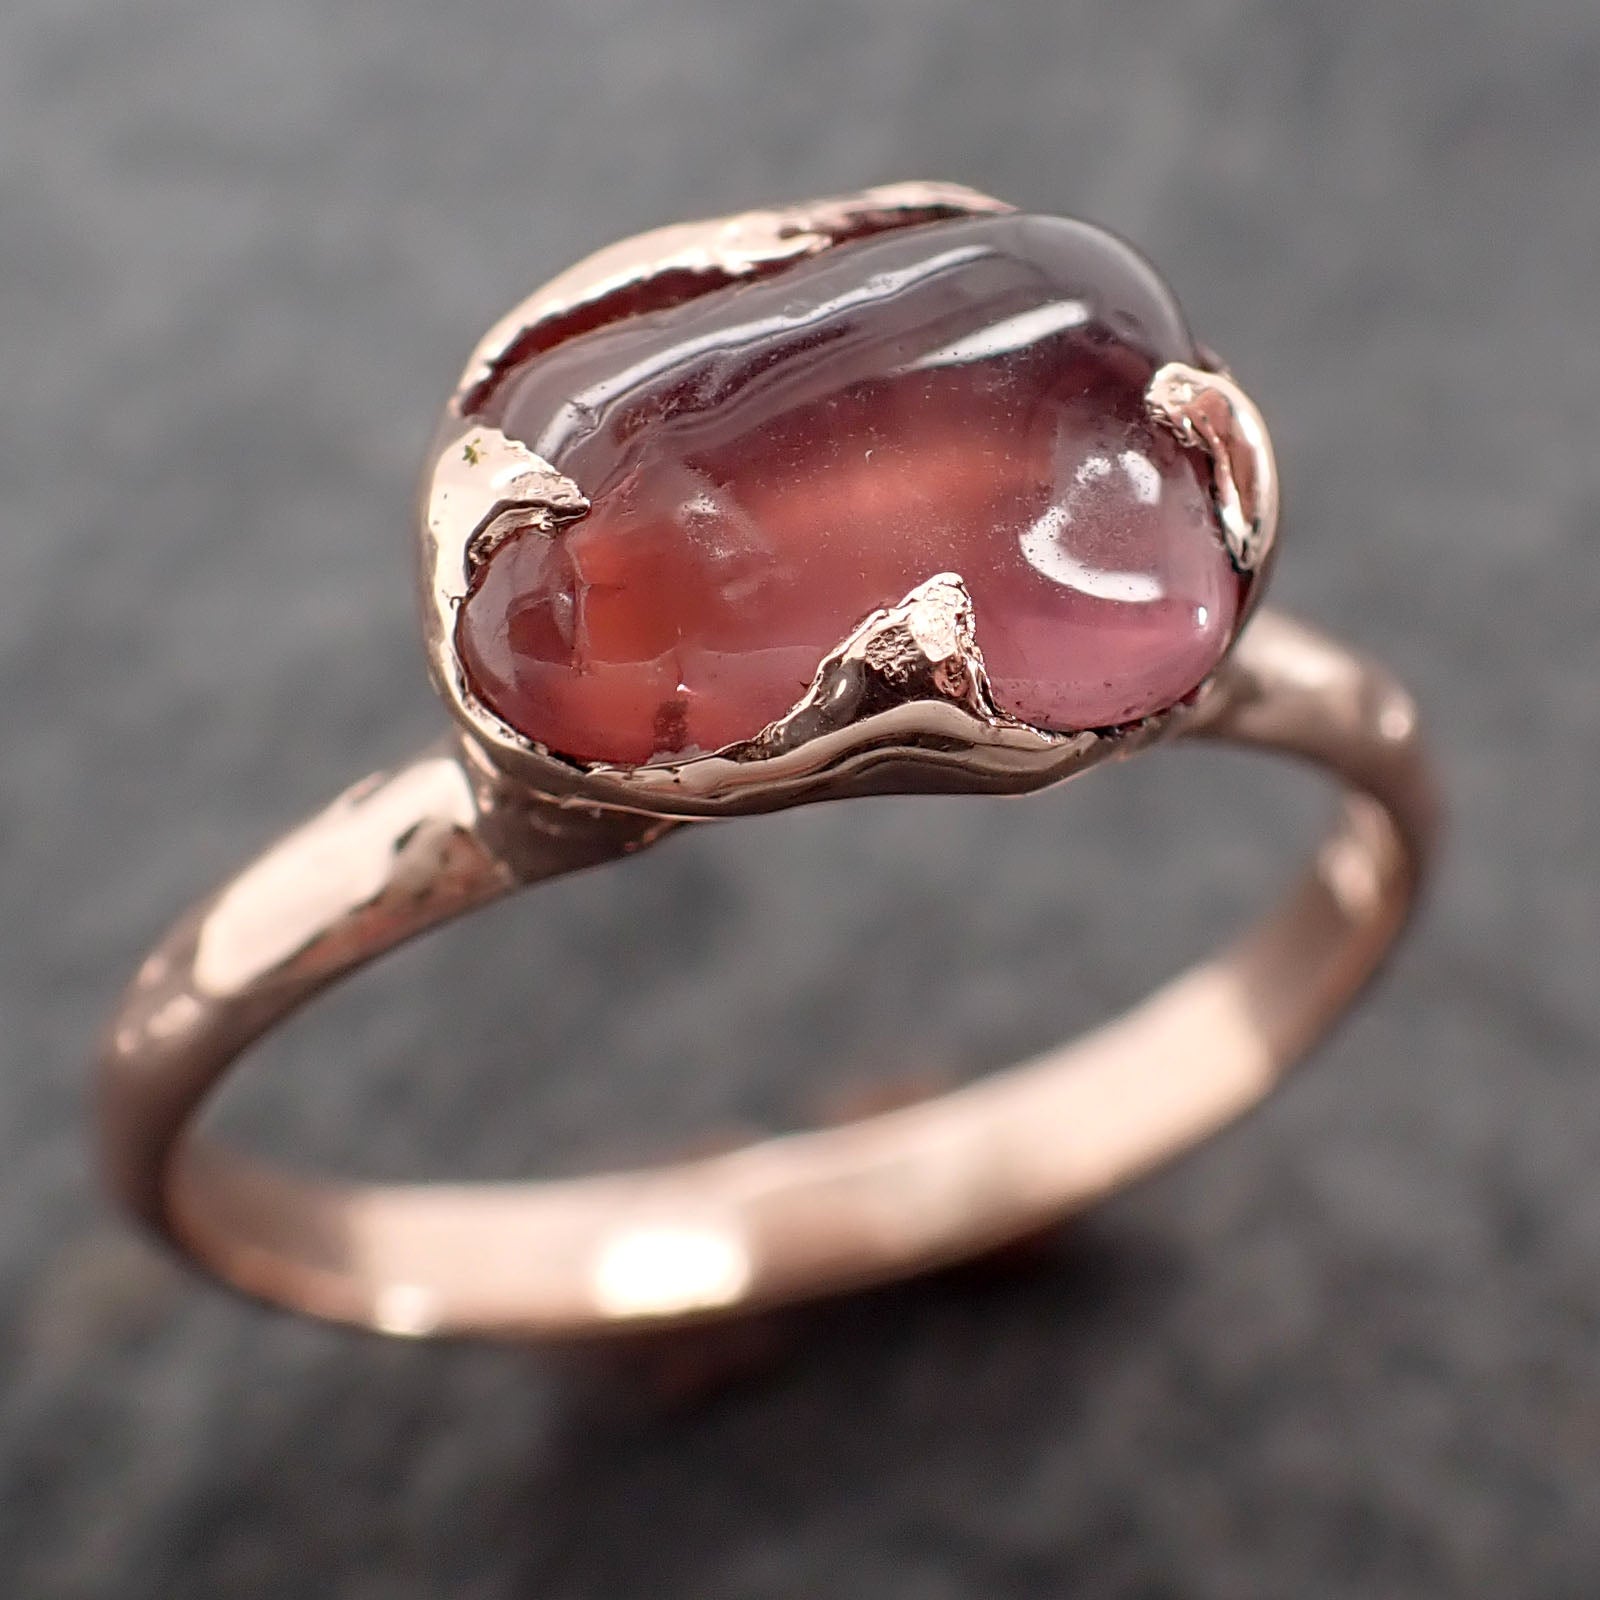 Sapphire Pebble red candy polished 14k Rose gold Solitaire gemstone ring 2711